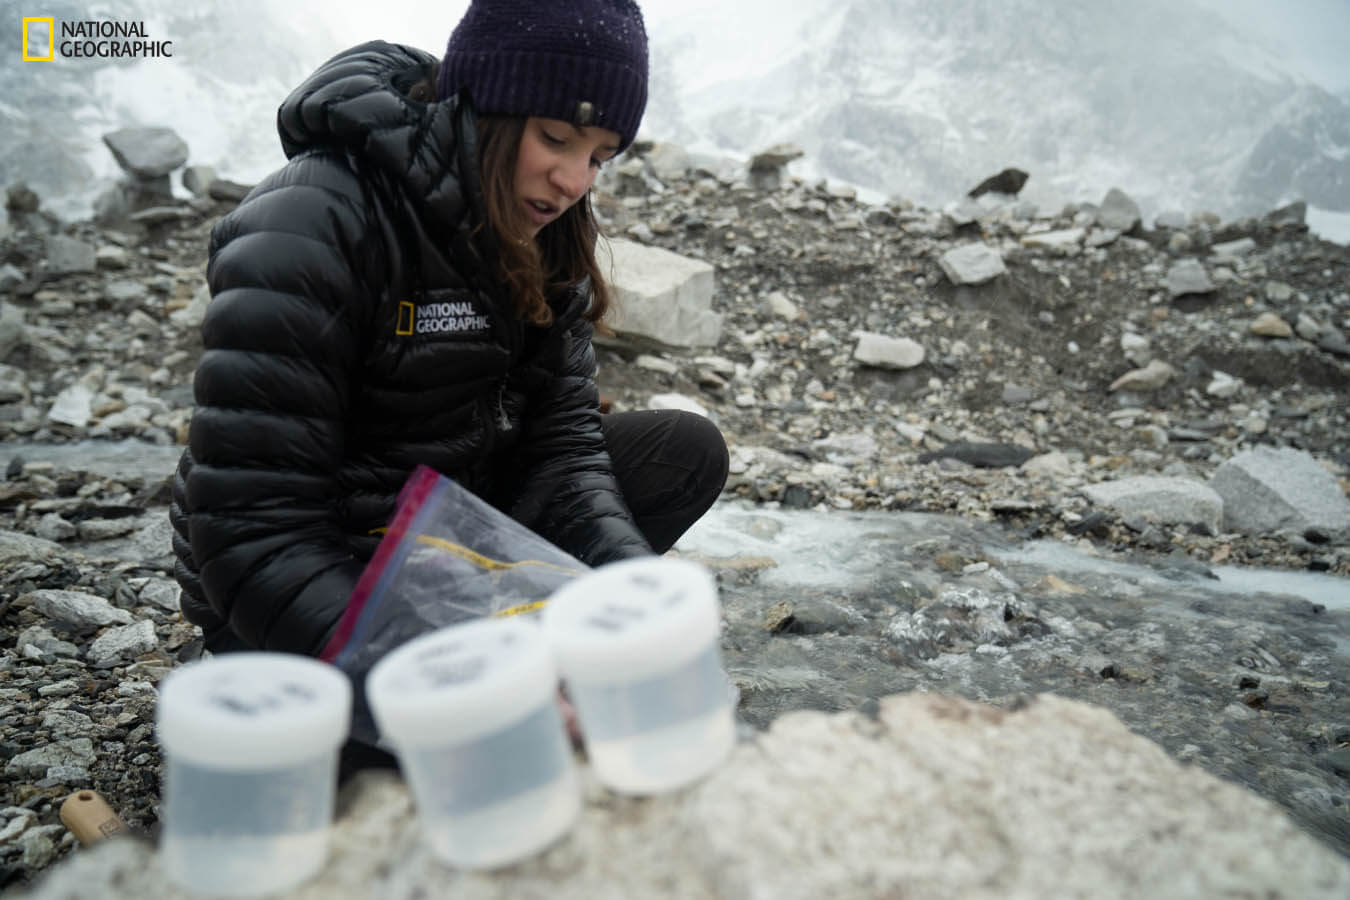 A woman collects samples near Mount Everest Base Camp.